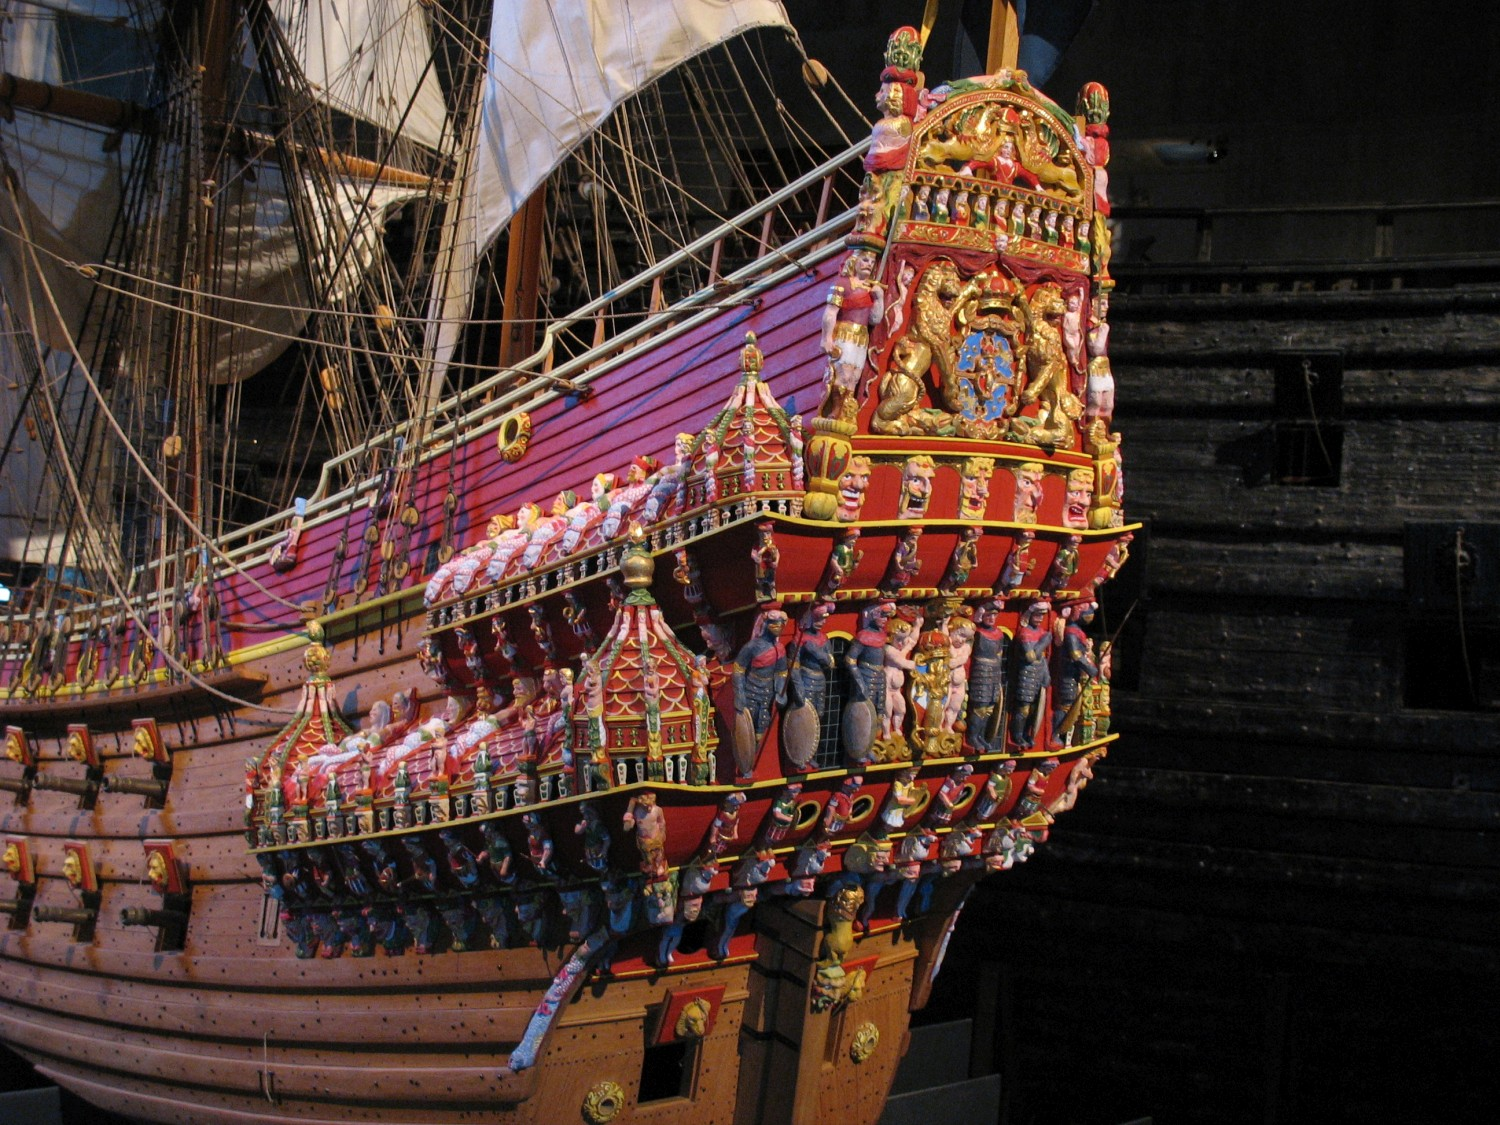 The Story Of ‘Vasa,’ The Epic 17th-Century Swedish Warship That Sank 20 Minutes Into Her Voyage